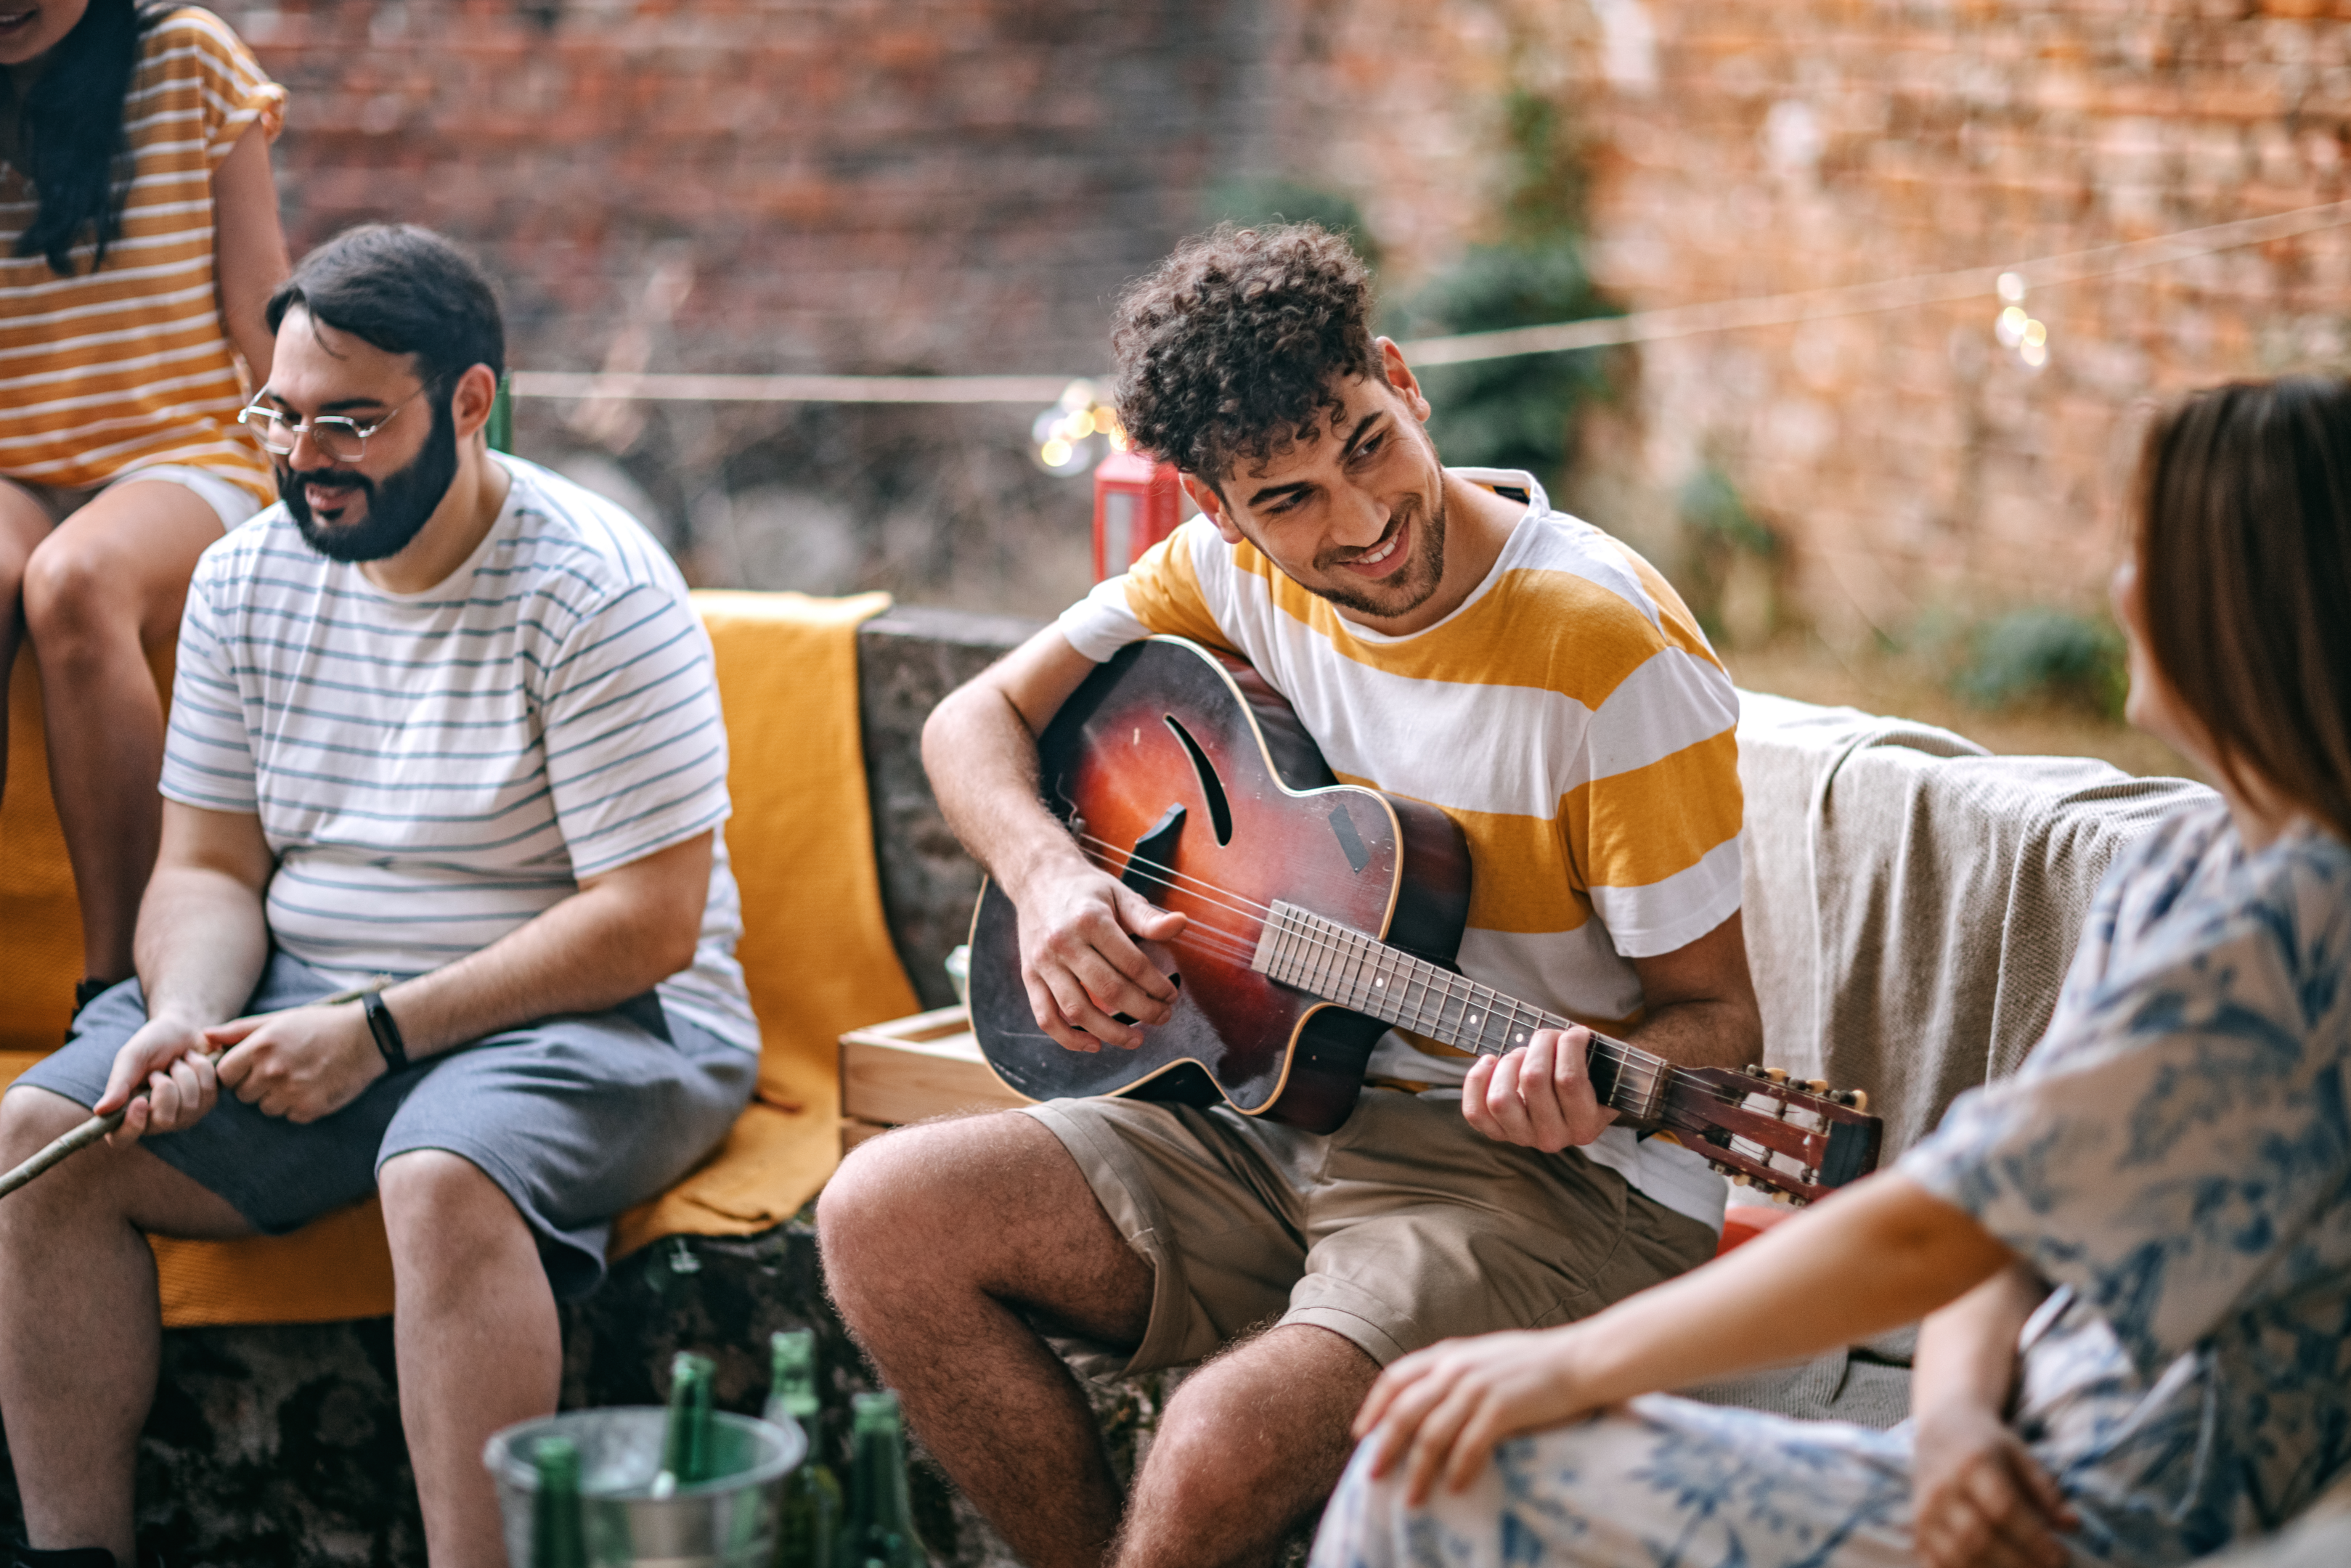 People enjoying live music and a guy playing a guitar